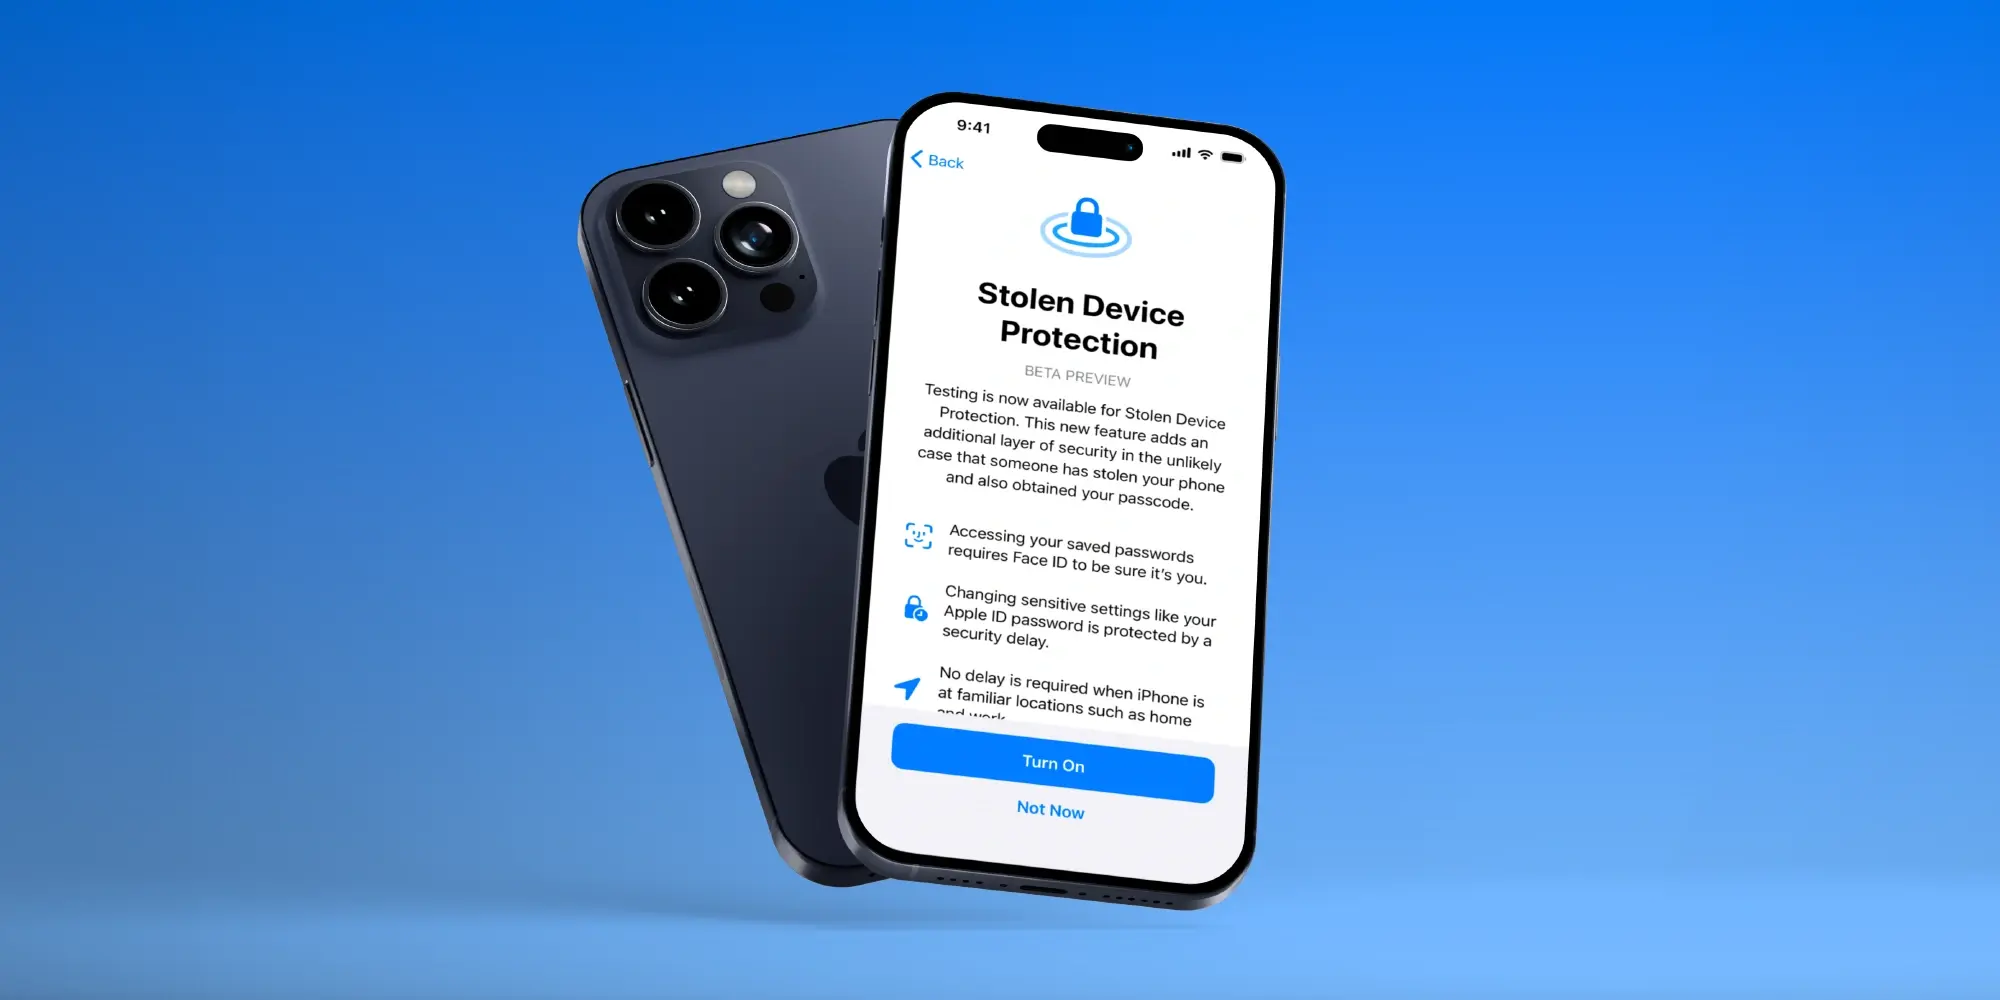 Breaking News: IOS 17.3 Beta Introduces Cutting-Edge Stolen Device Protection For IPhone Users